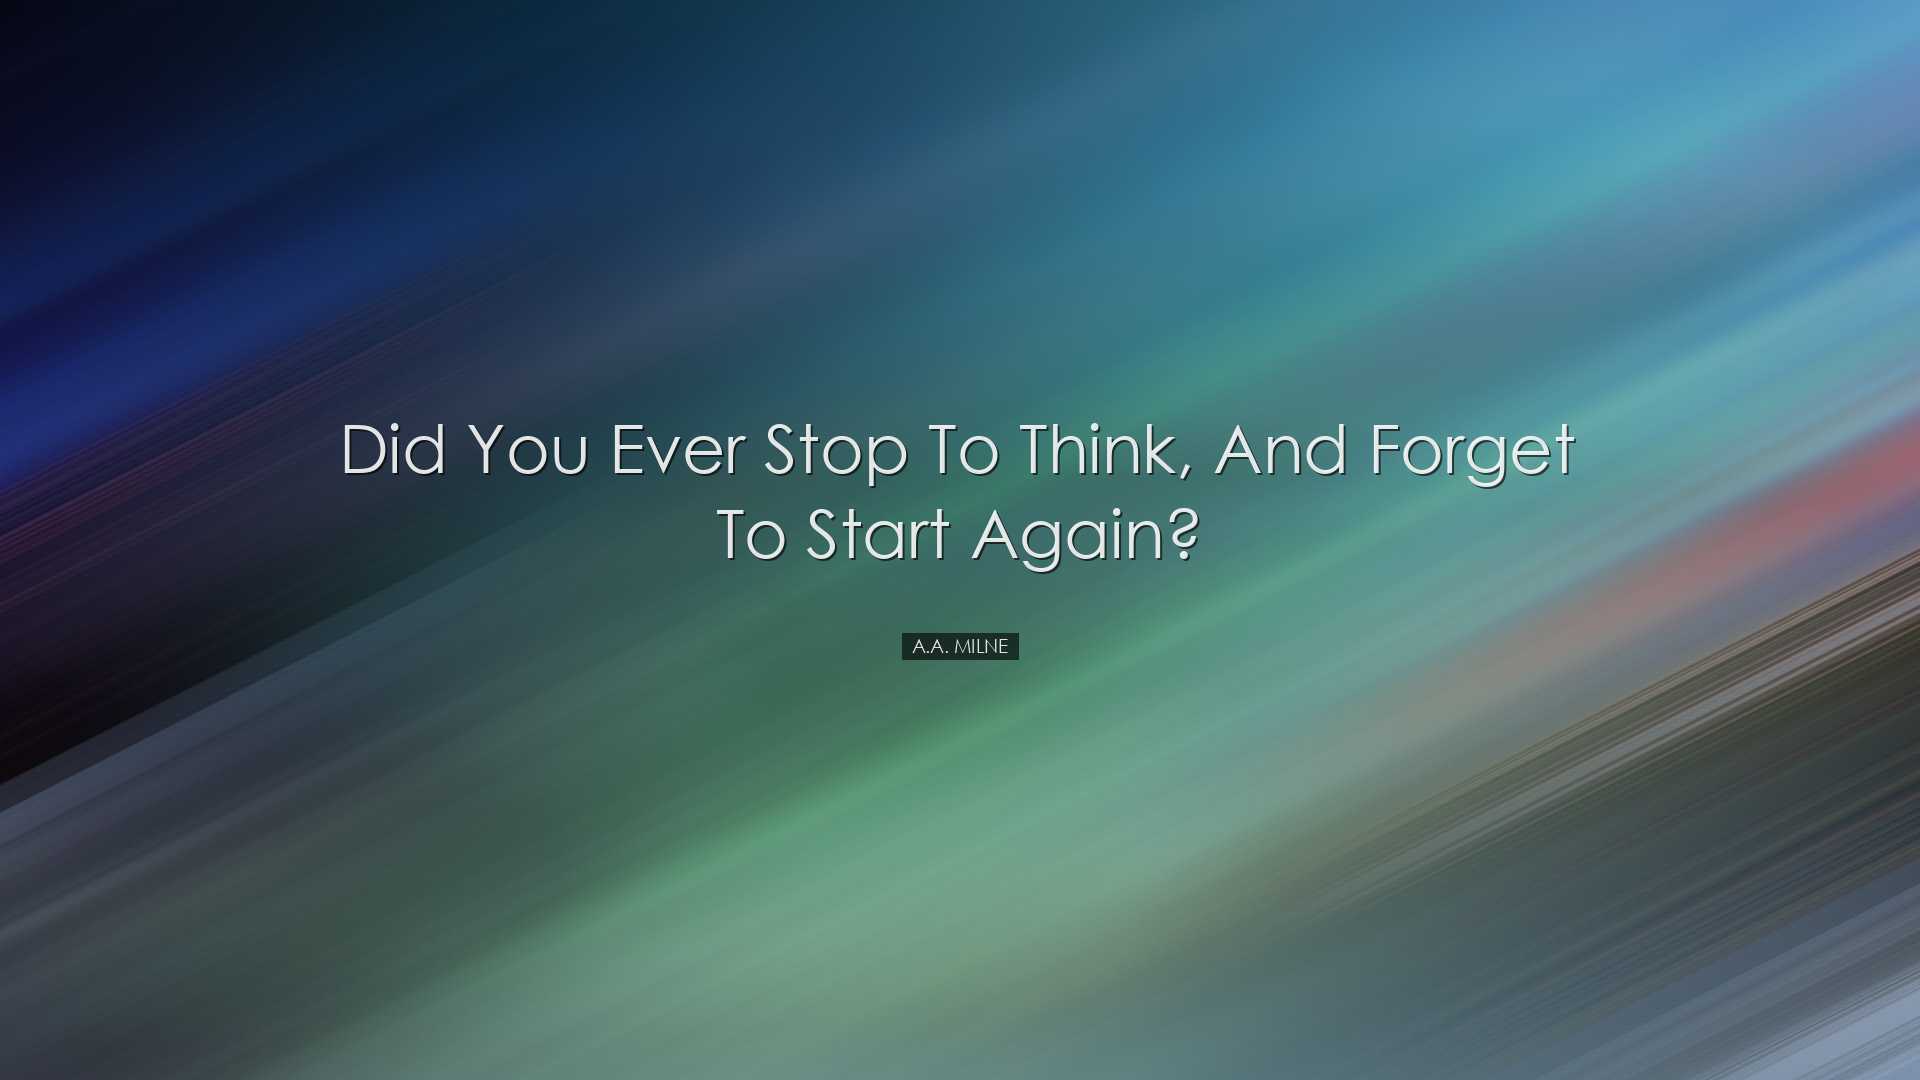 Did you ever stop to think, and forget to start again? - A.A. Miln